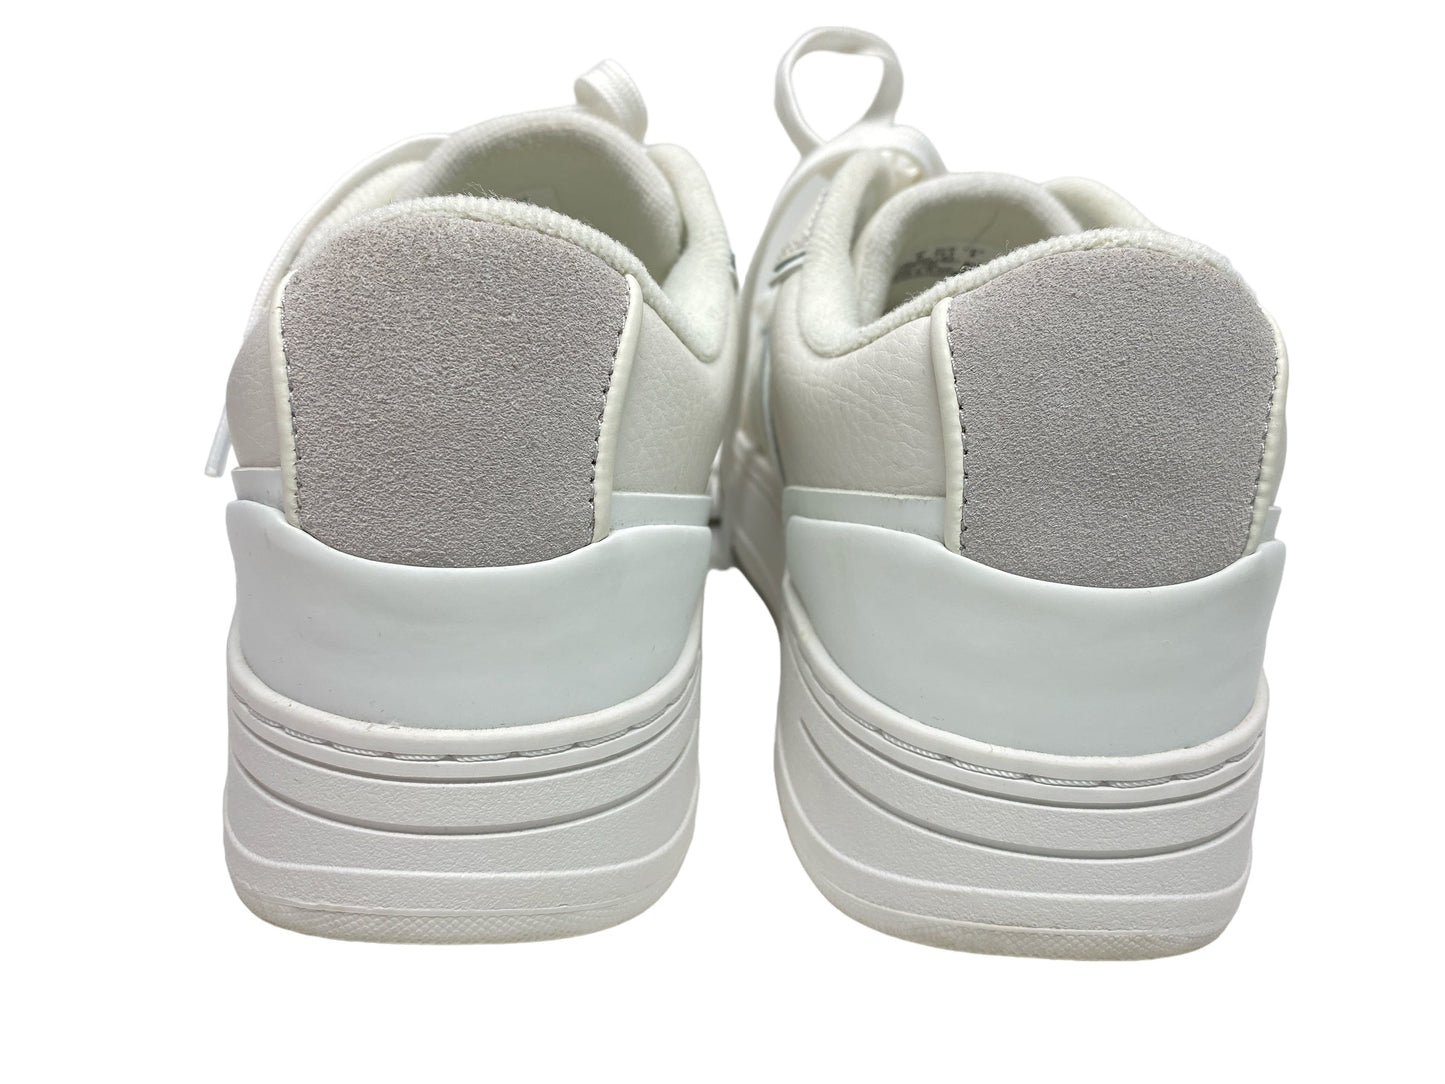 White Shoes Sneakers Lacoste, Size 8